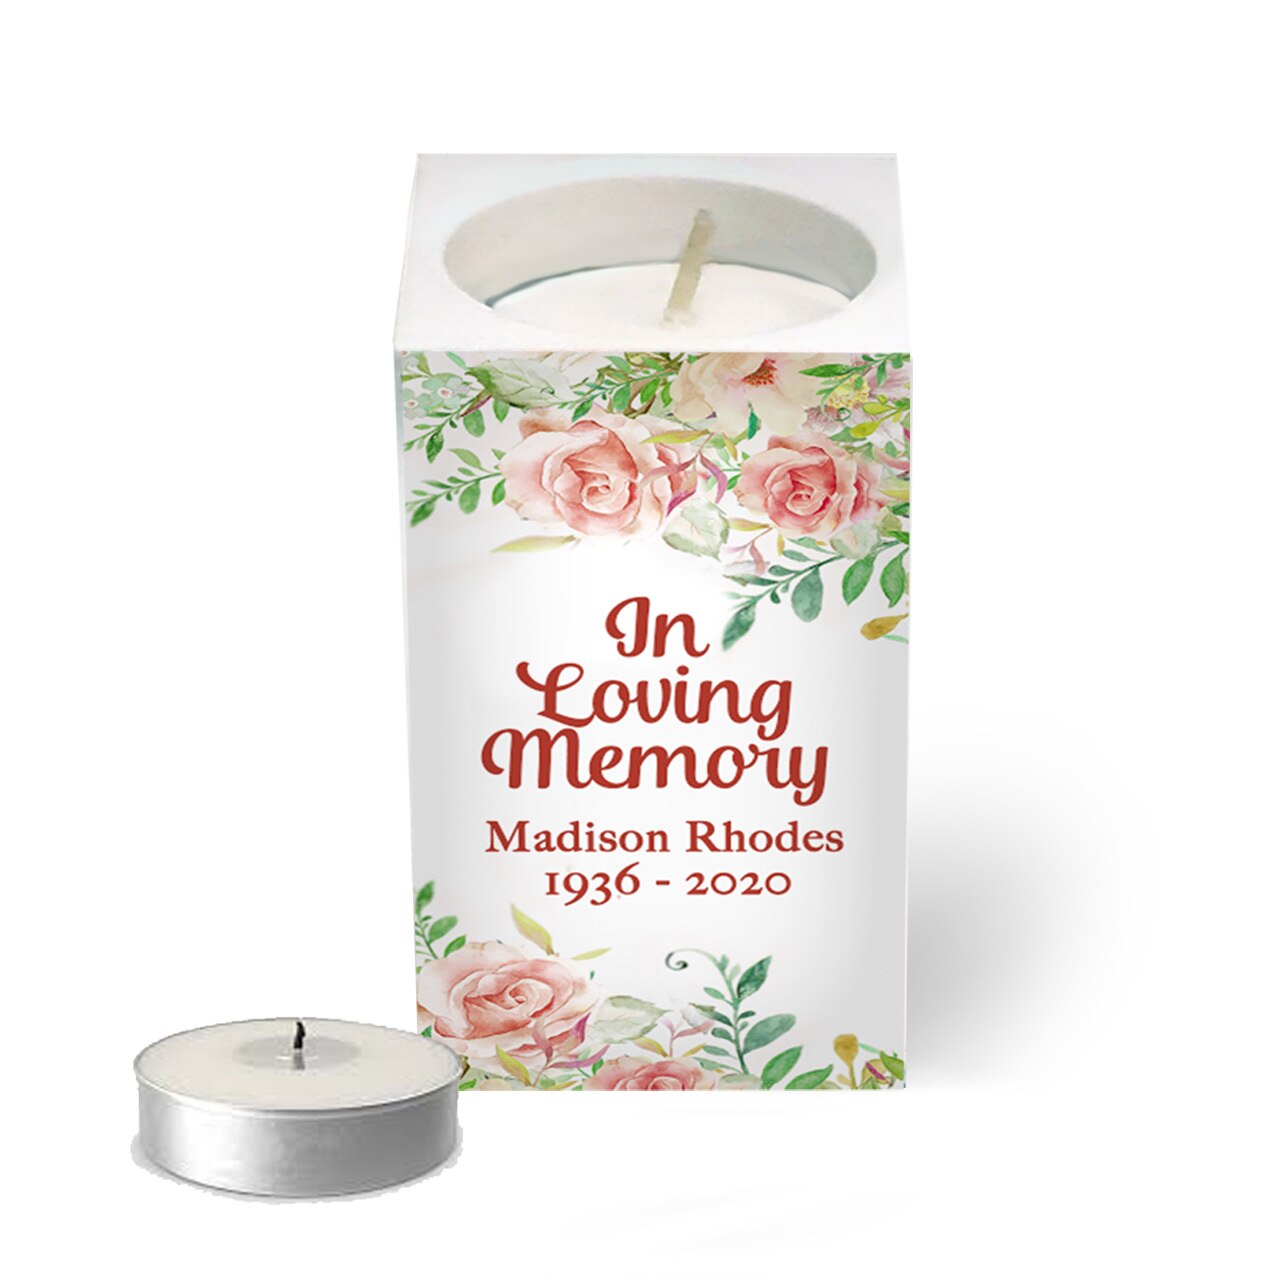 Spring Floral Personalized Mini Memorial Tea Light Candle Holder.